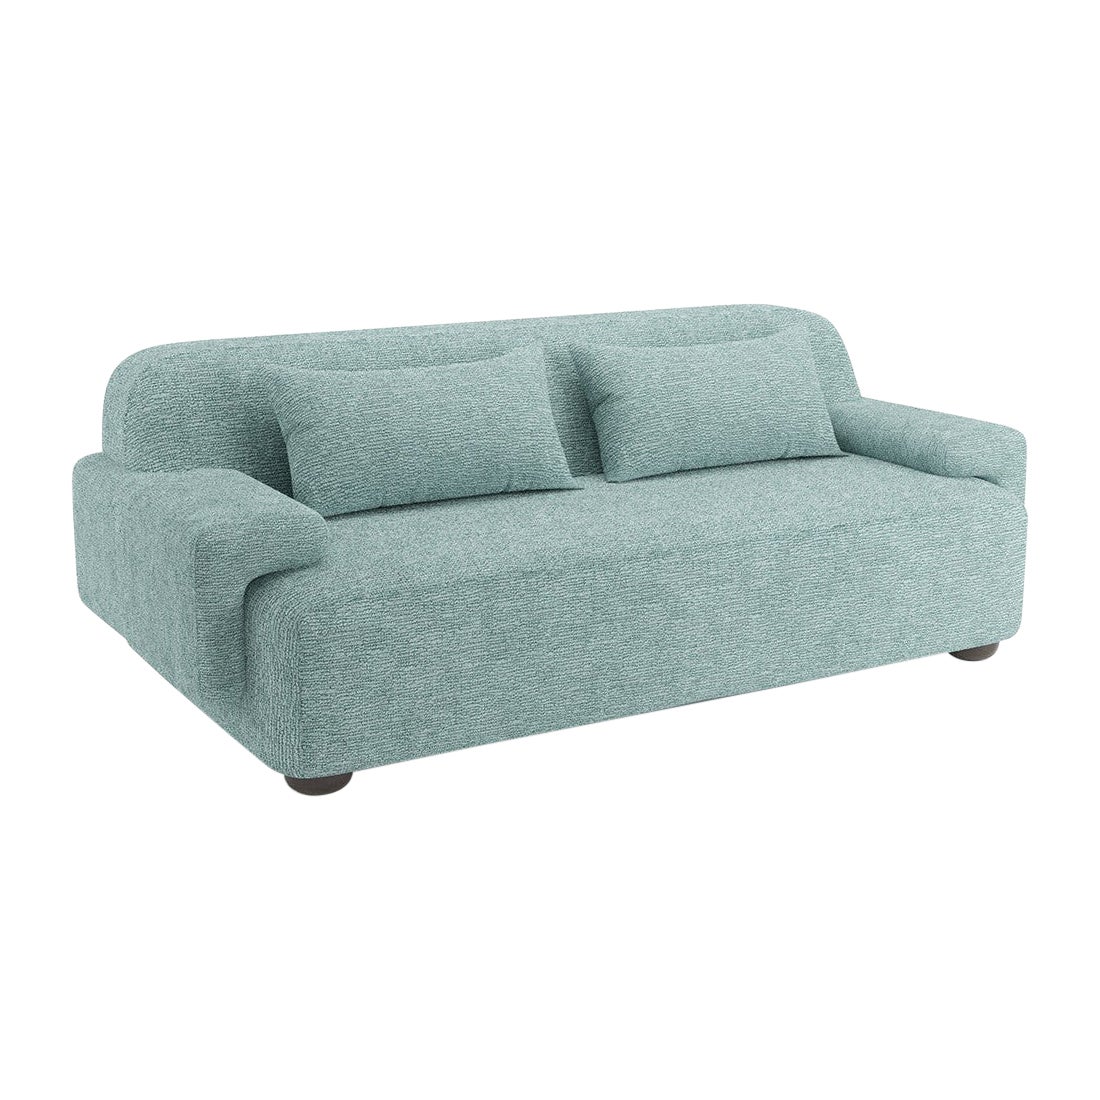 Popus Editions Lena 3 Seater Sofa in Mint Megeve Fabric with Knit Effect